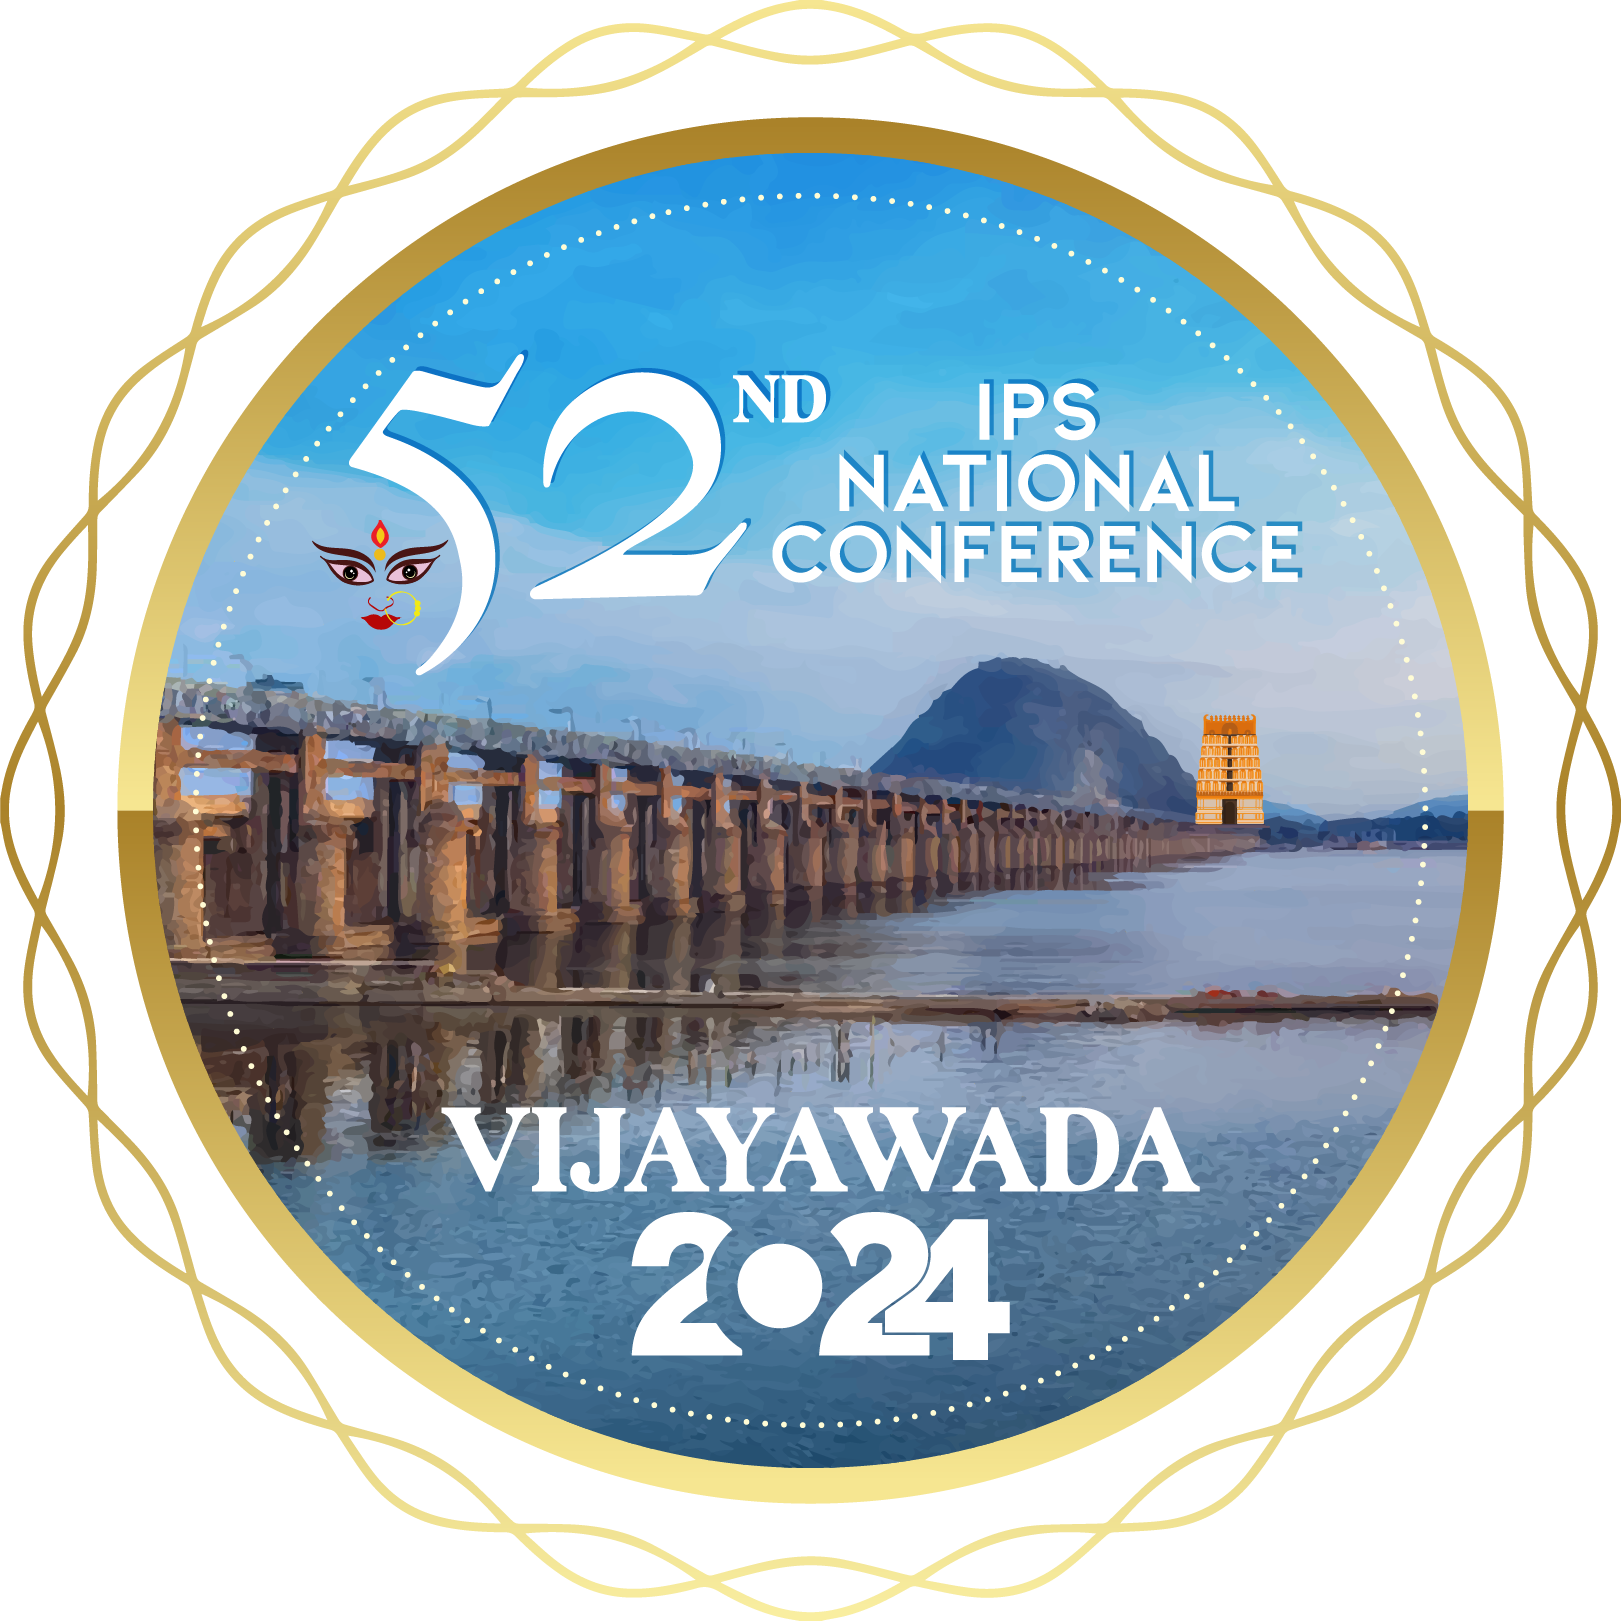 52nd IPS National Conference, 2024